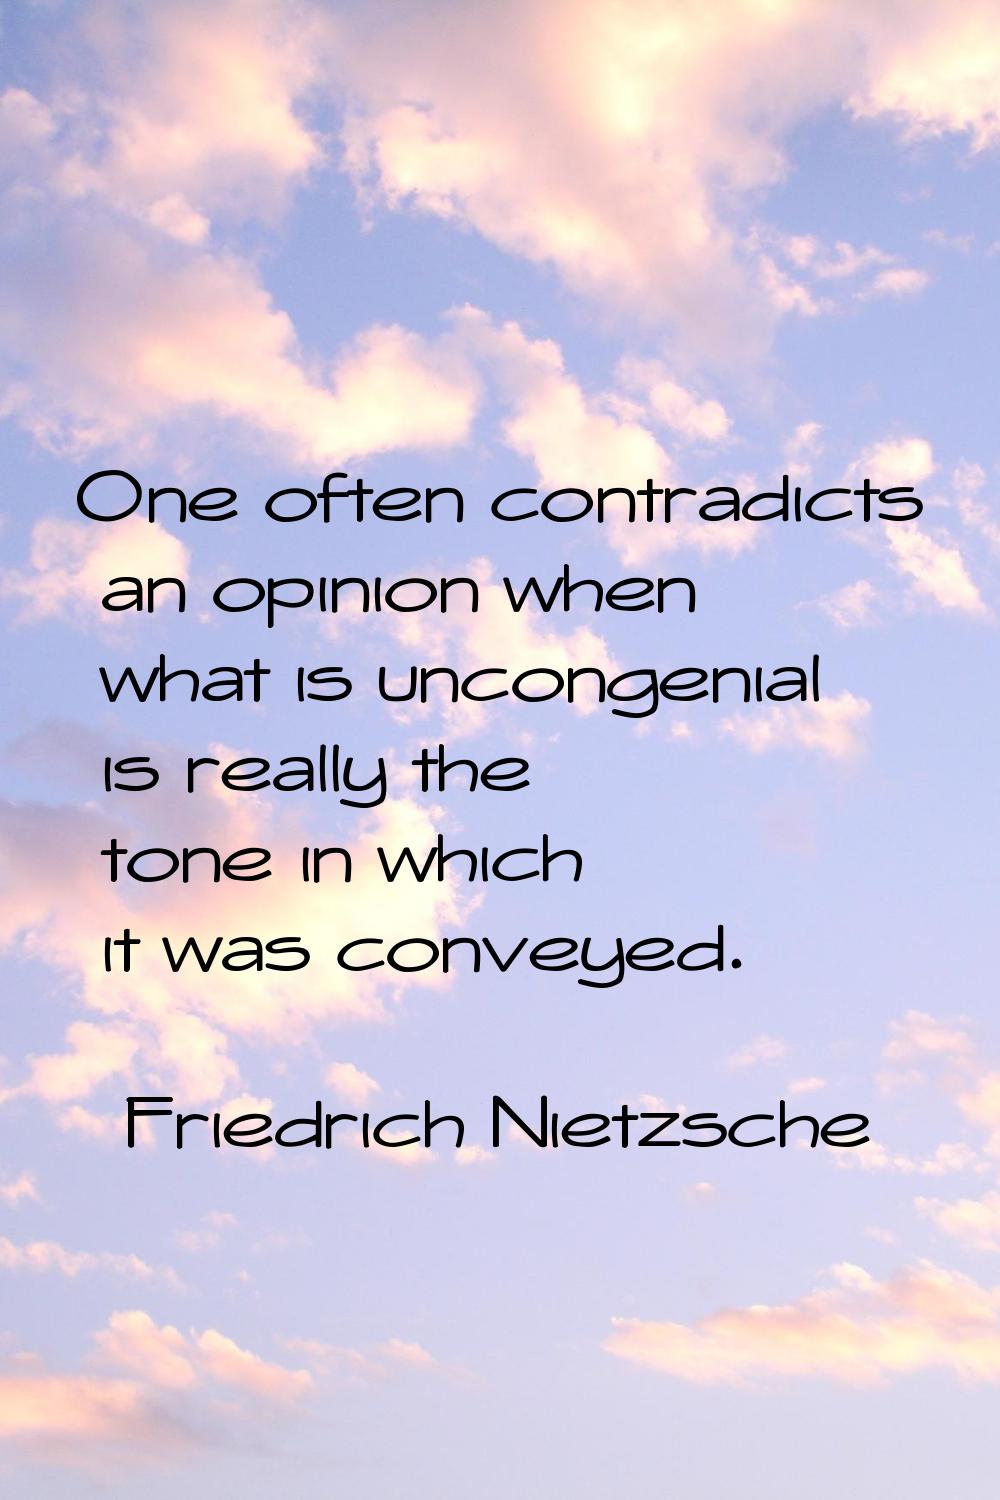 One often contradicts an opinion when what is uncongenial is really the tone in which it was convey